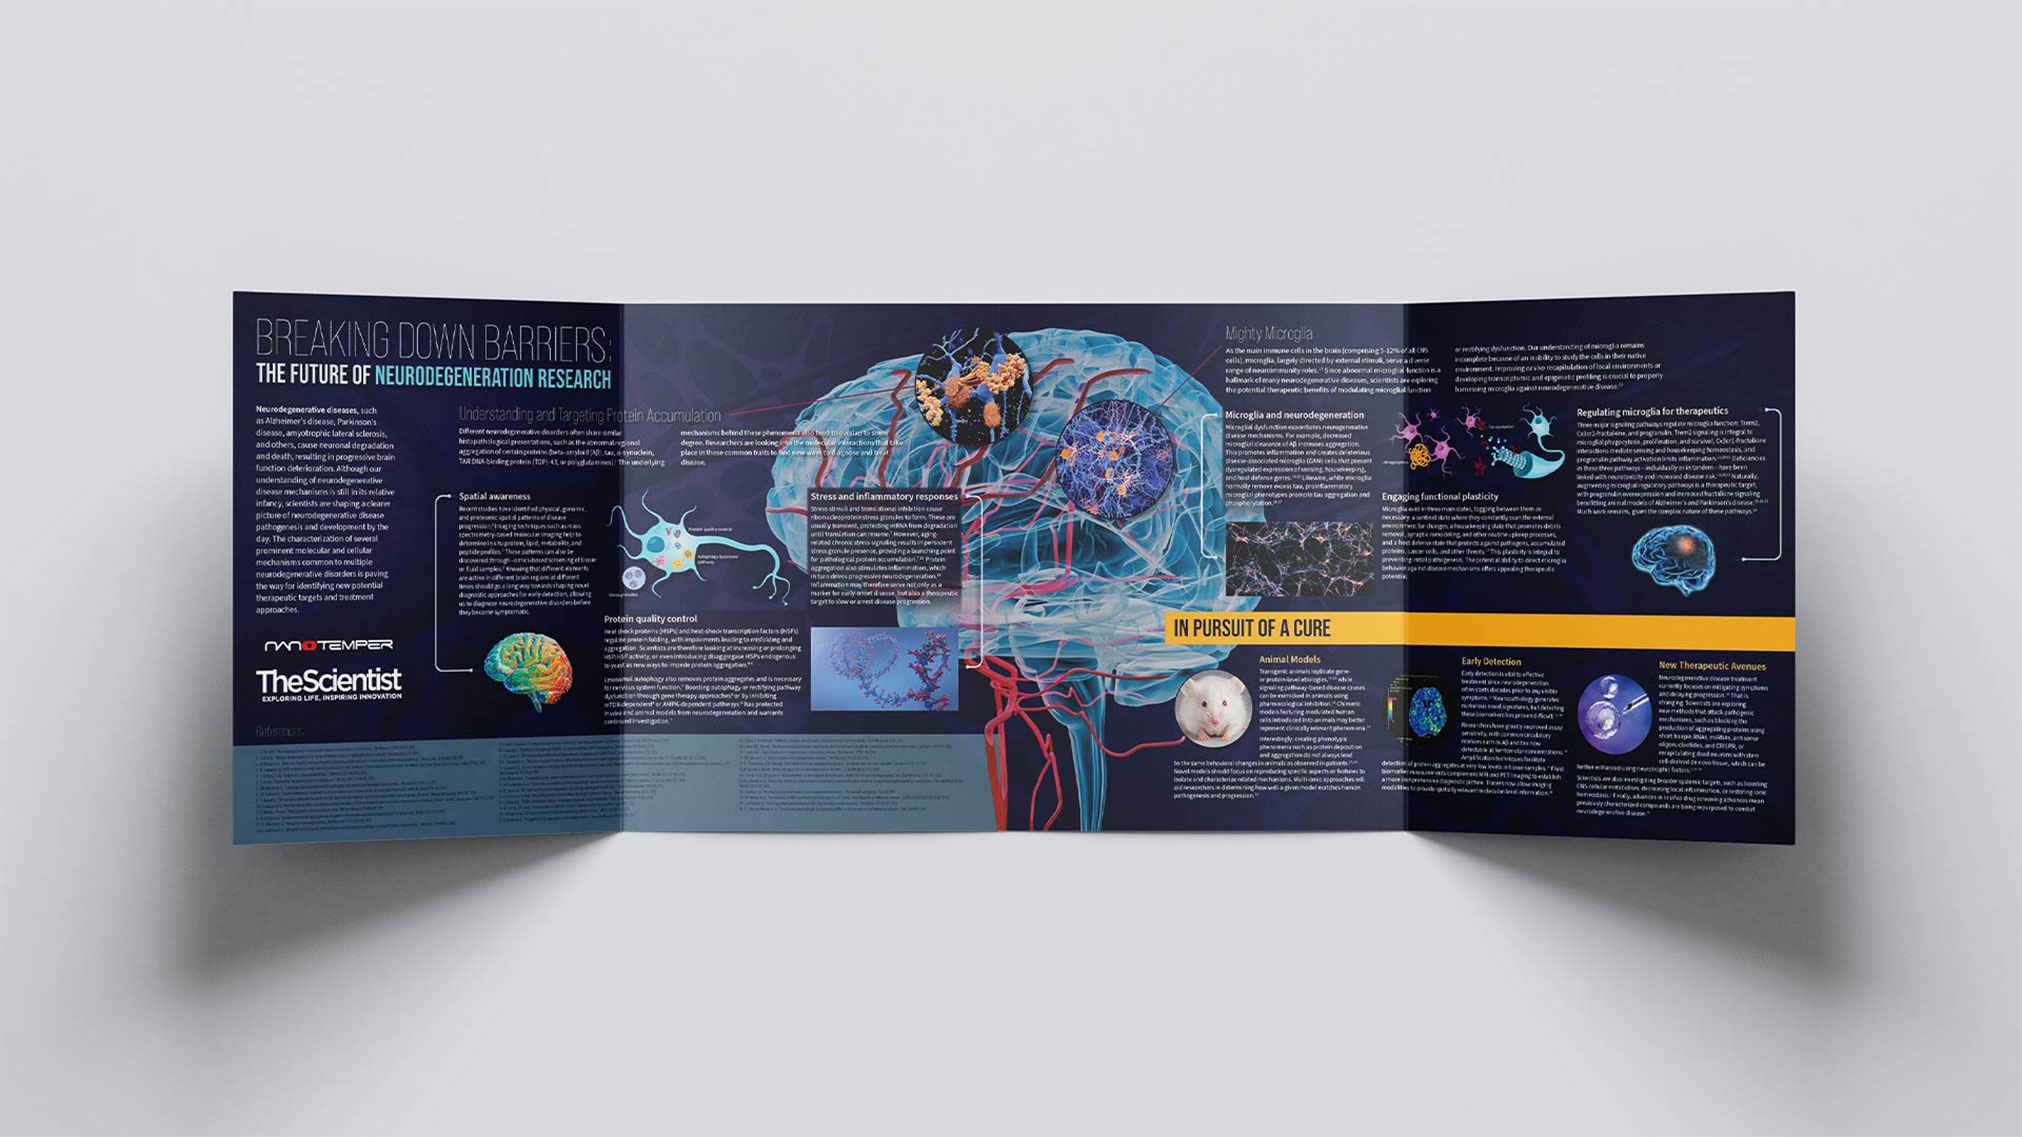 A double-sided gatefold infographic produced for the October issue of The Scientist magazine.
